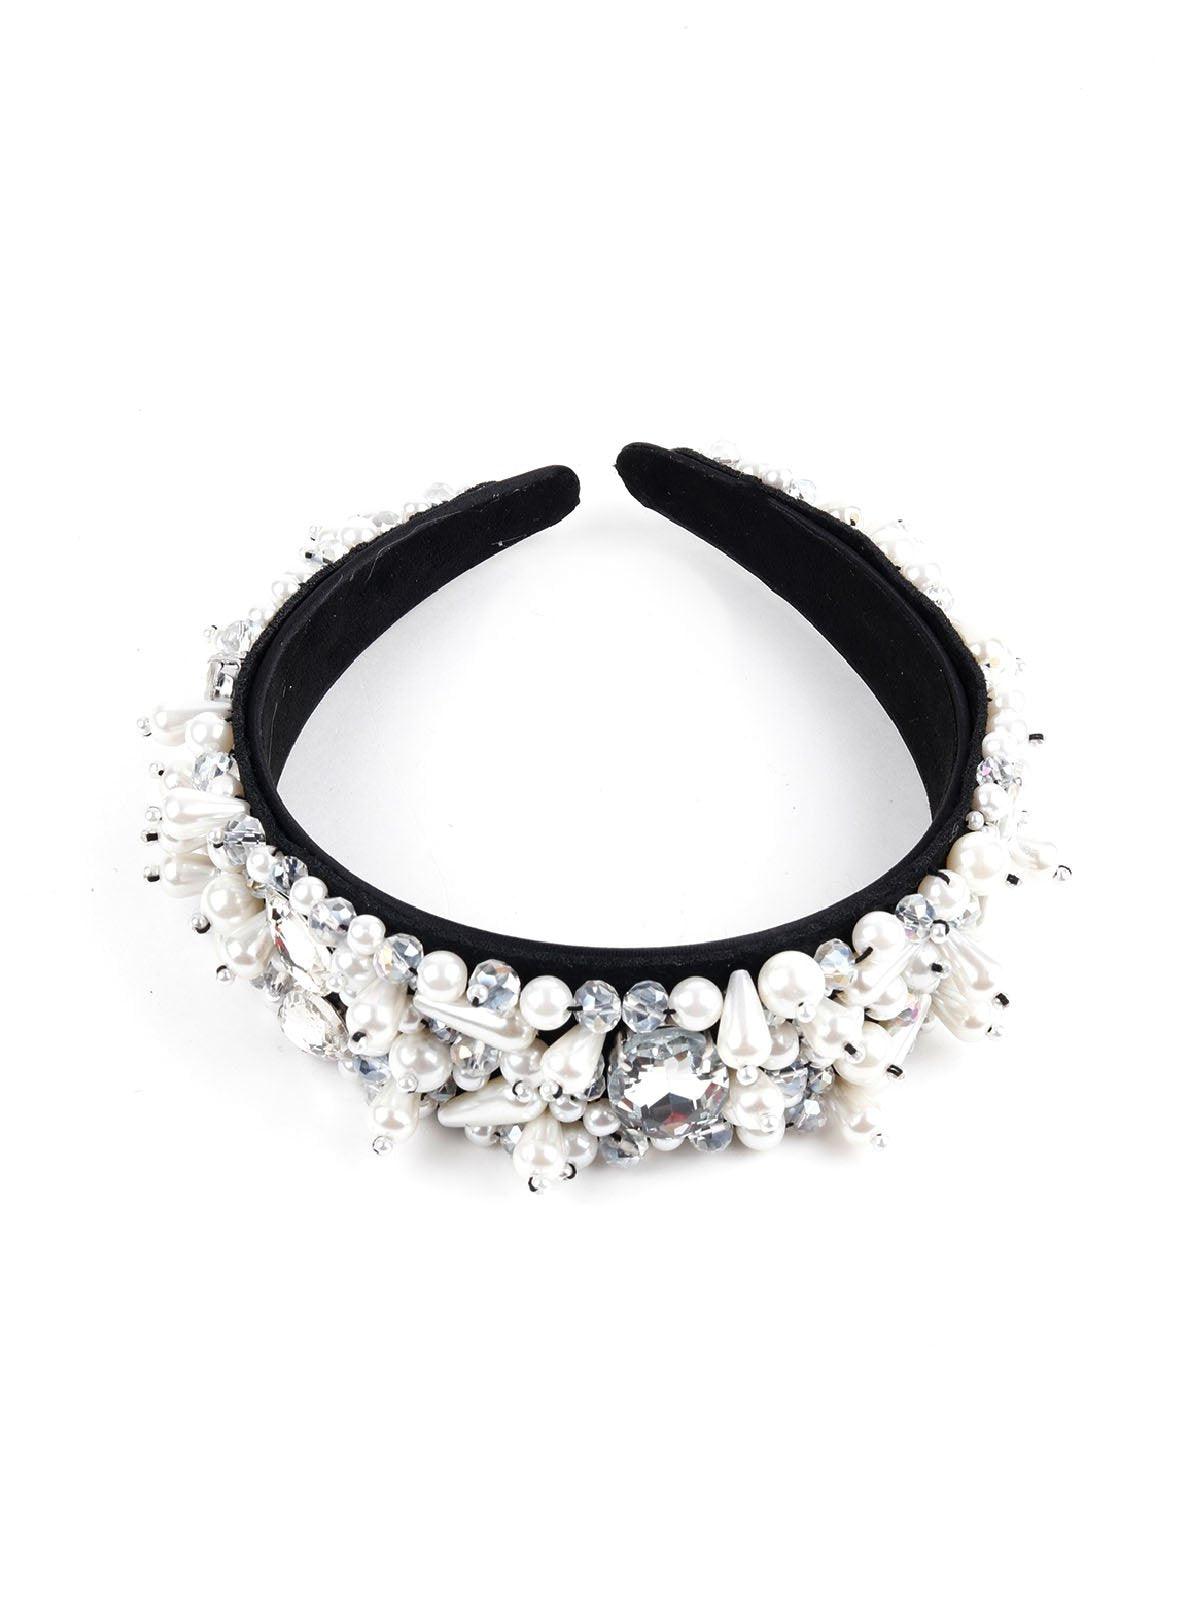 Beautiful Black Band With White Beads - Odette